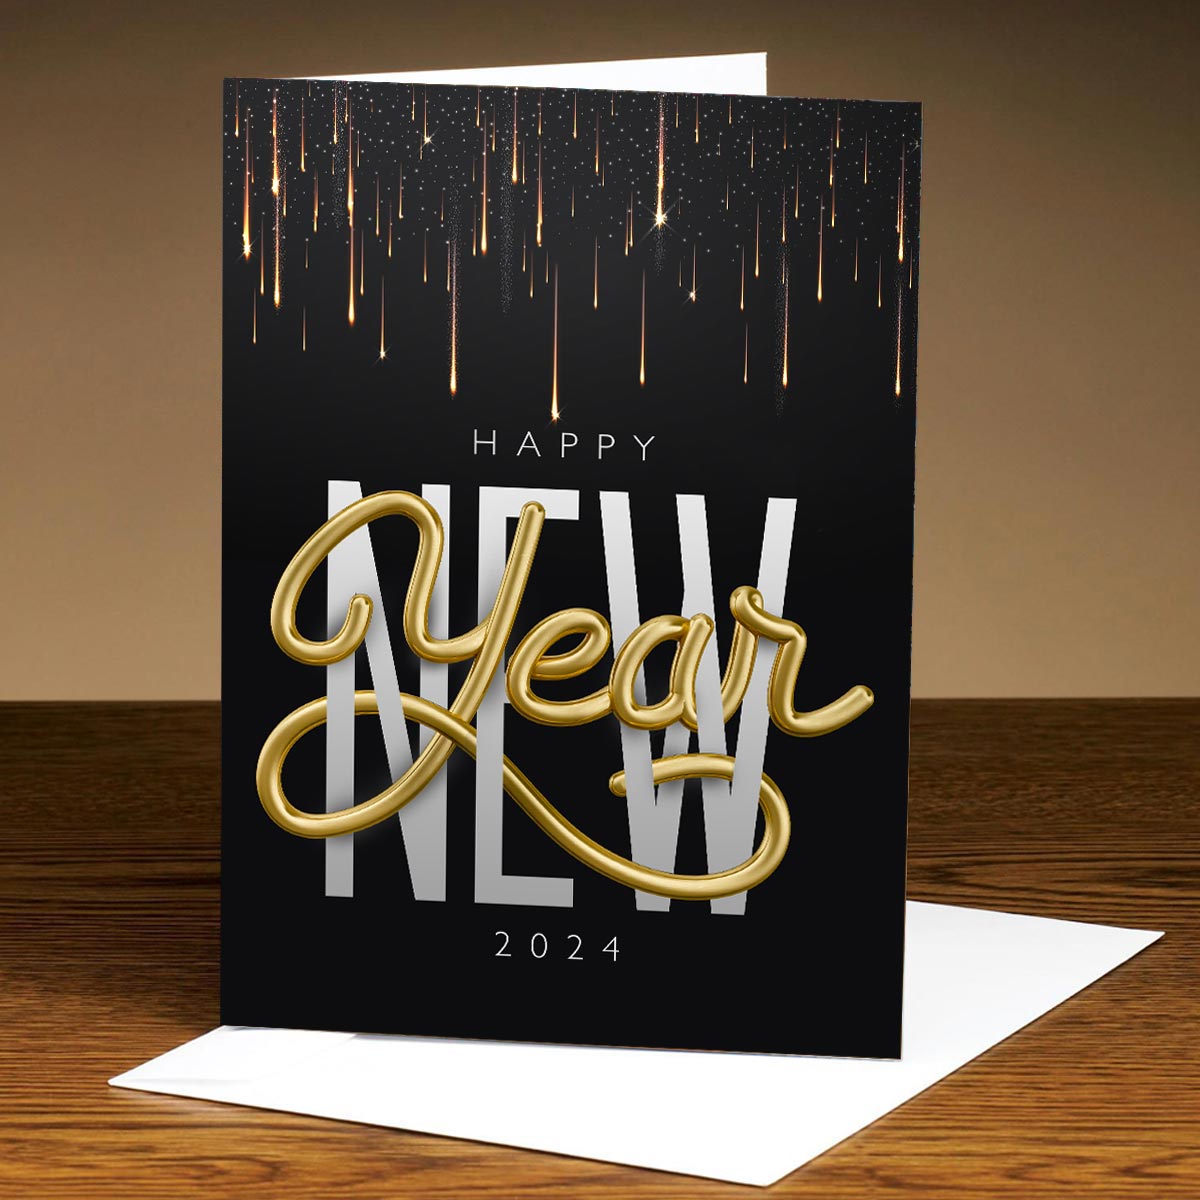 Wish you a Happy New Year 2024 Greeting Card